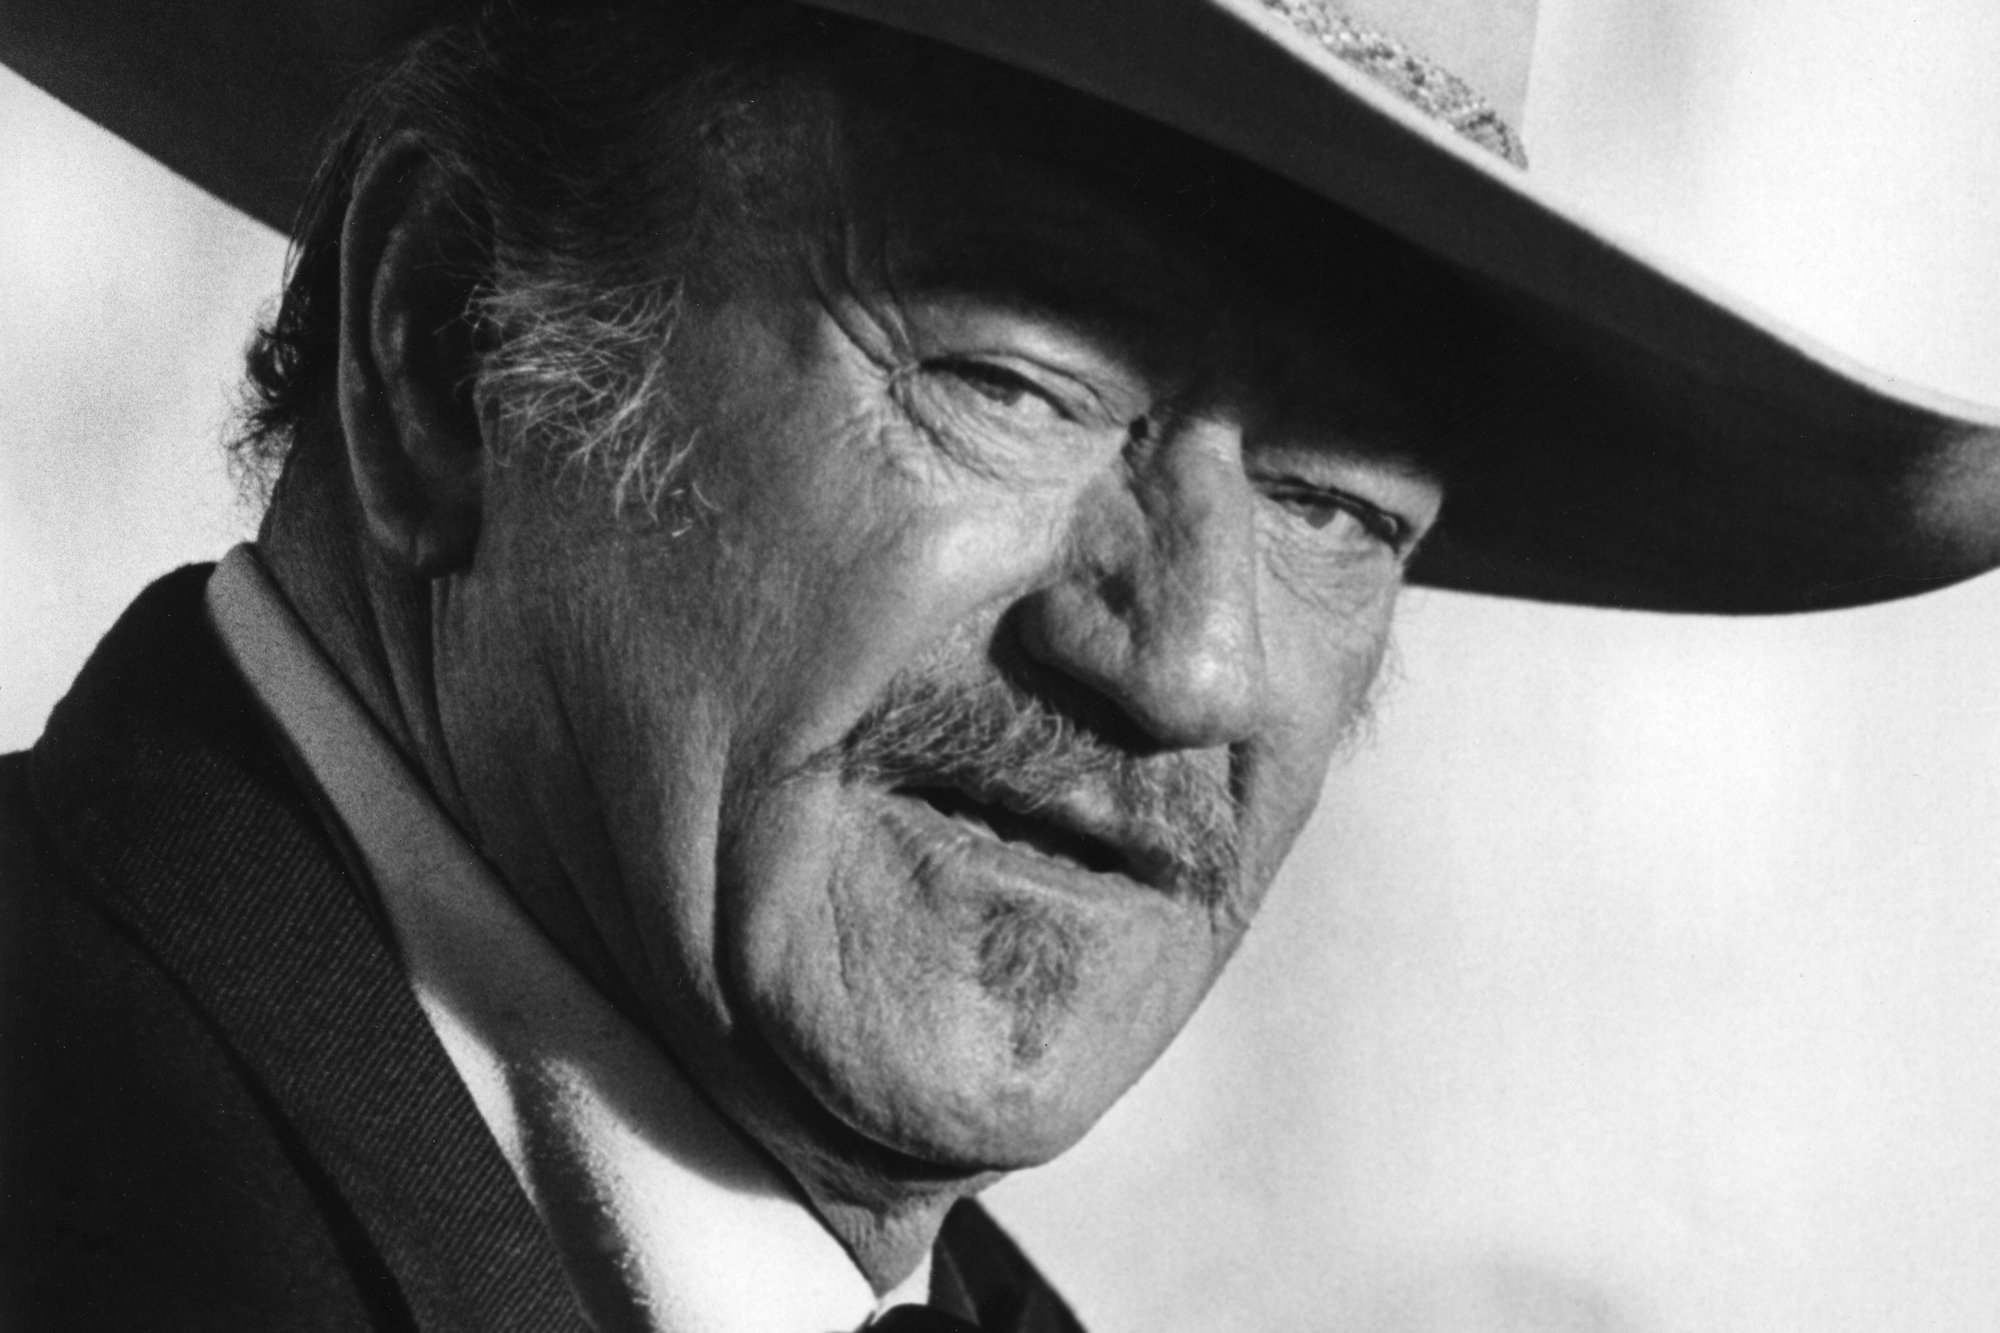 'The Shootist' John Wayne as J.B. Books in a black-and-white picture wearing a cowboy hat